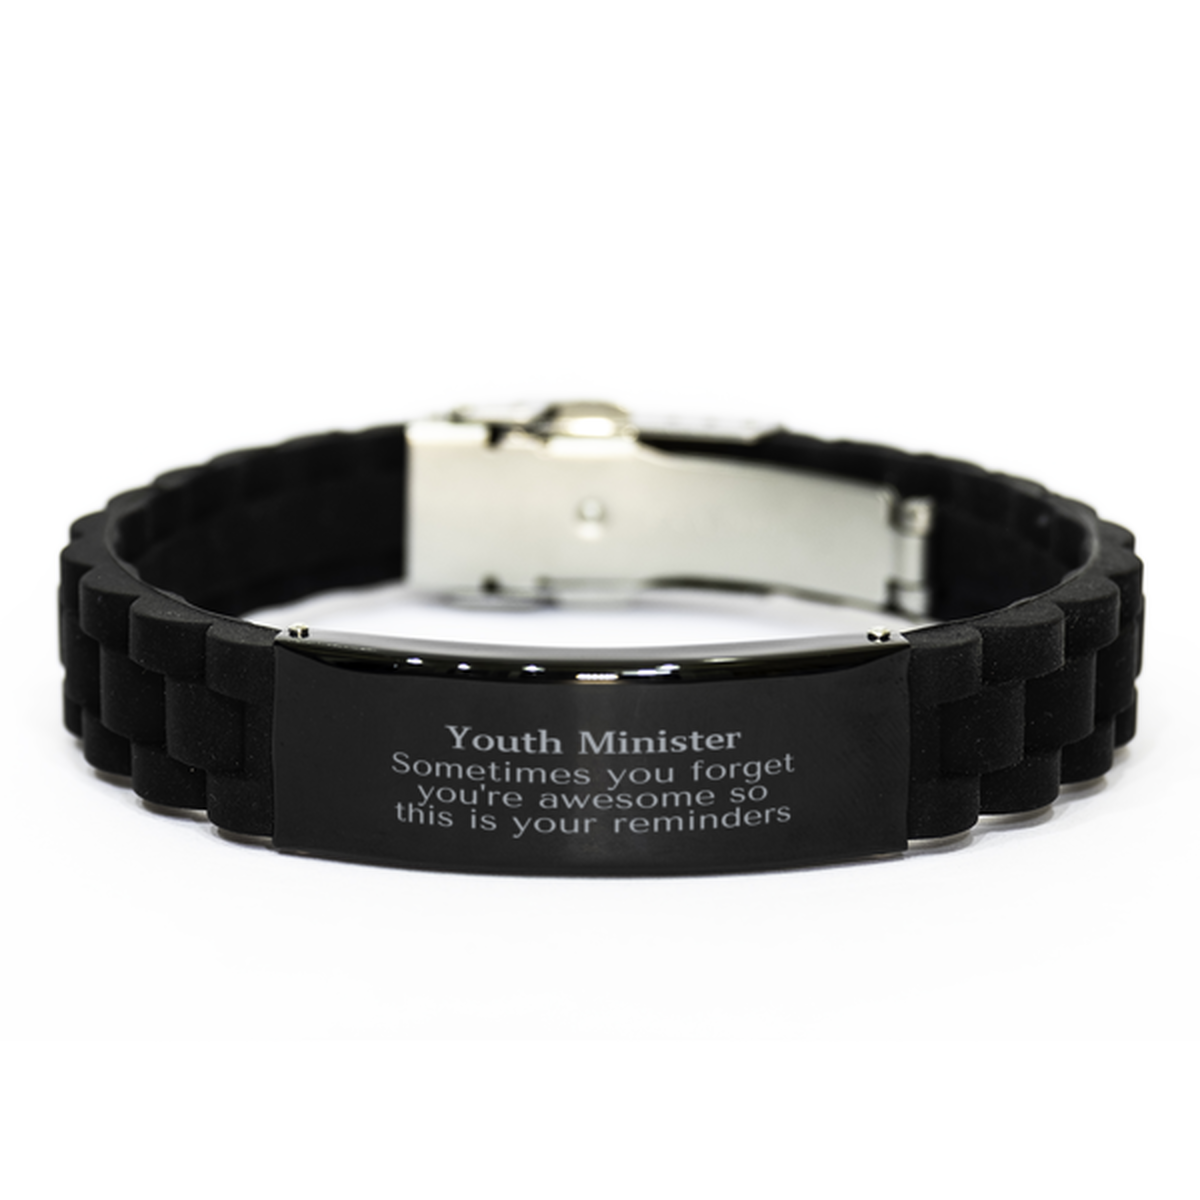 Sentimental Youth Minister Black Glidelock Clasp Bracelet, Youth Minister Sometimes you forget you're awesome so this is your reminders, Graduation Christmas Birthday Gifts for Youth Minister, Men, Women, Coworkers